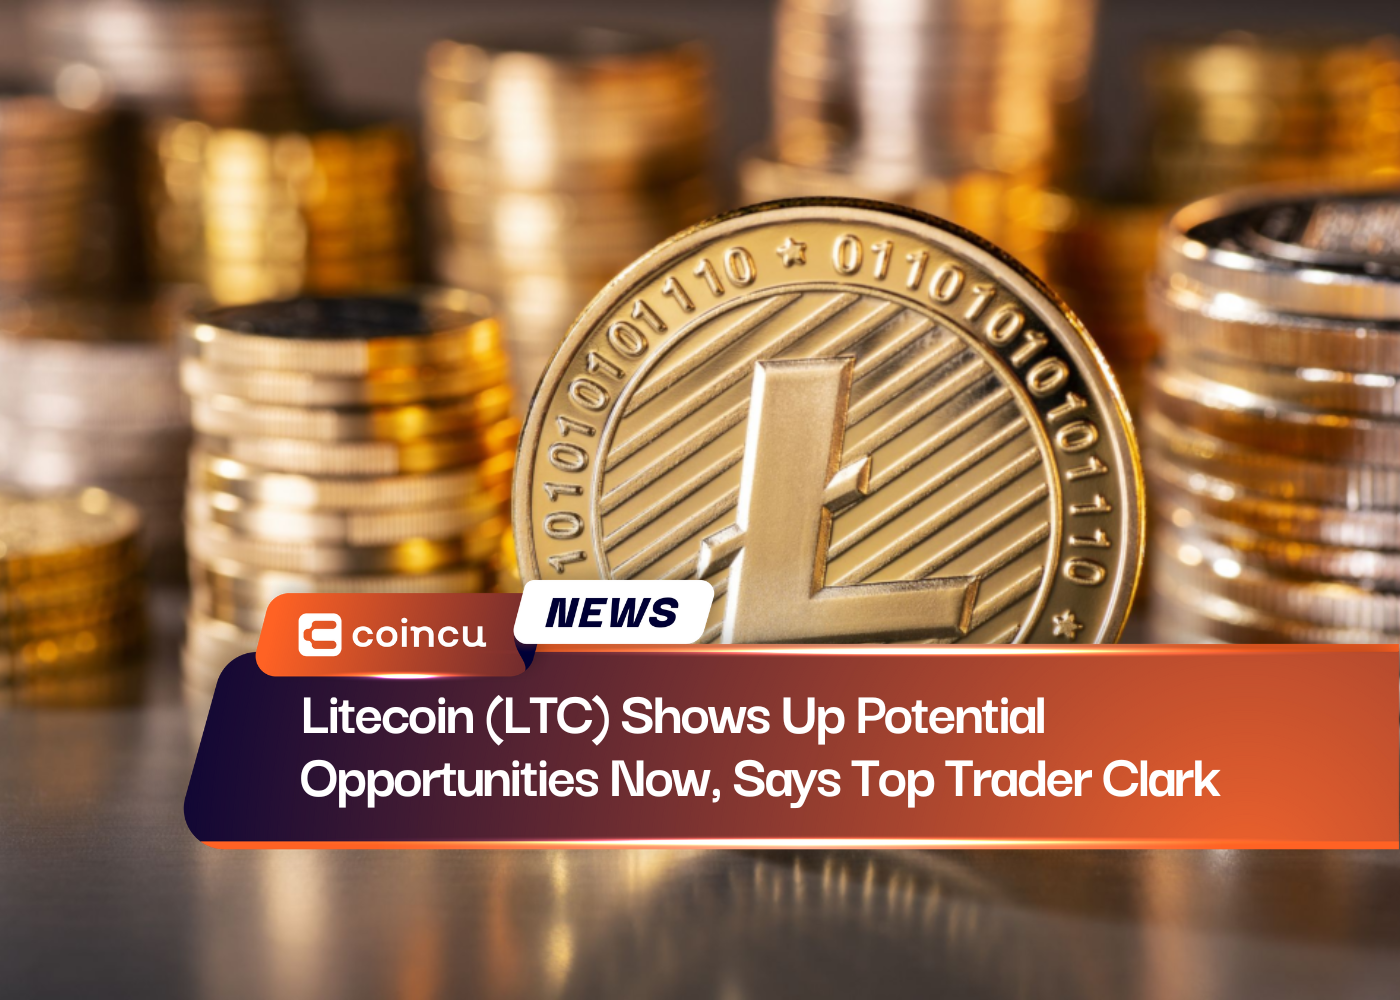 Litecoin (LTC) Shows Up Potential Opportunities Now, Says Top Trader Clark